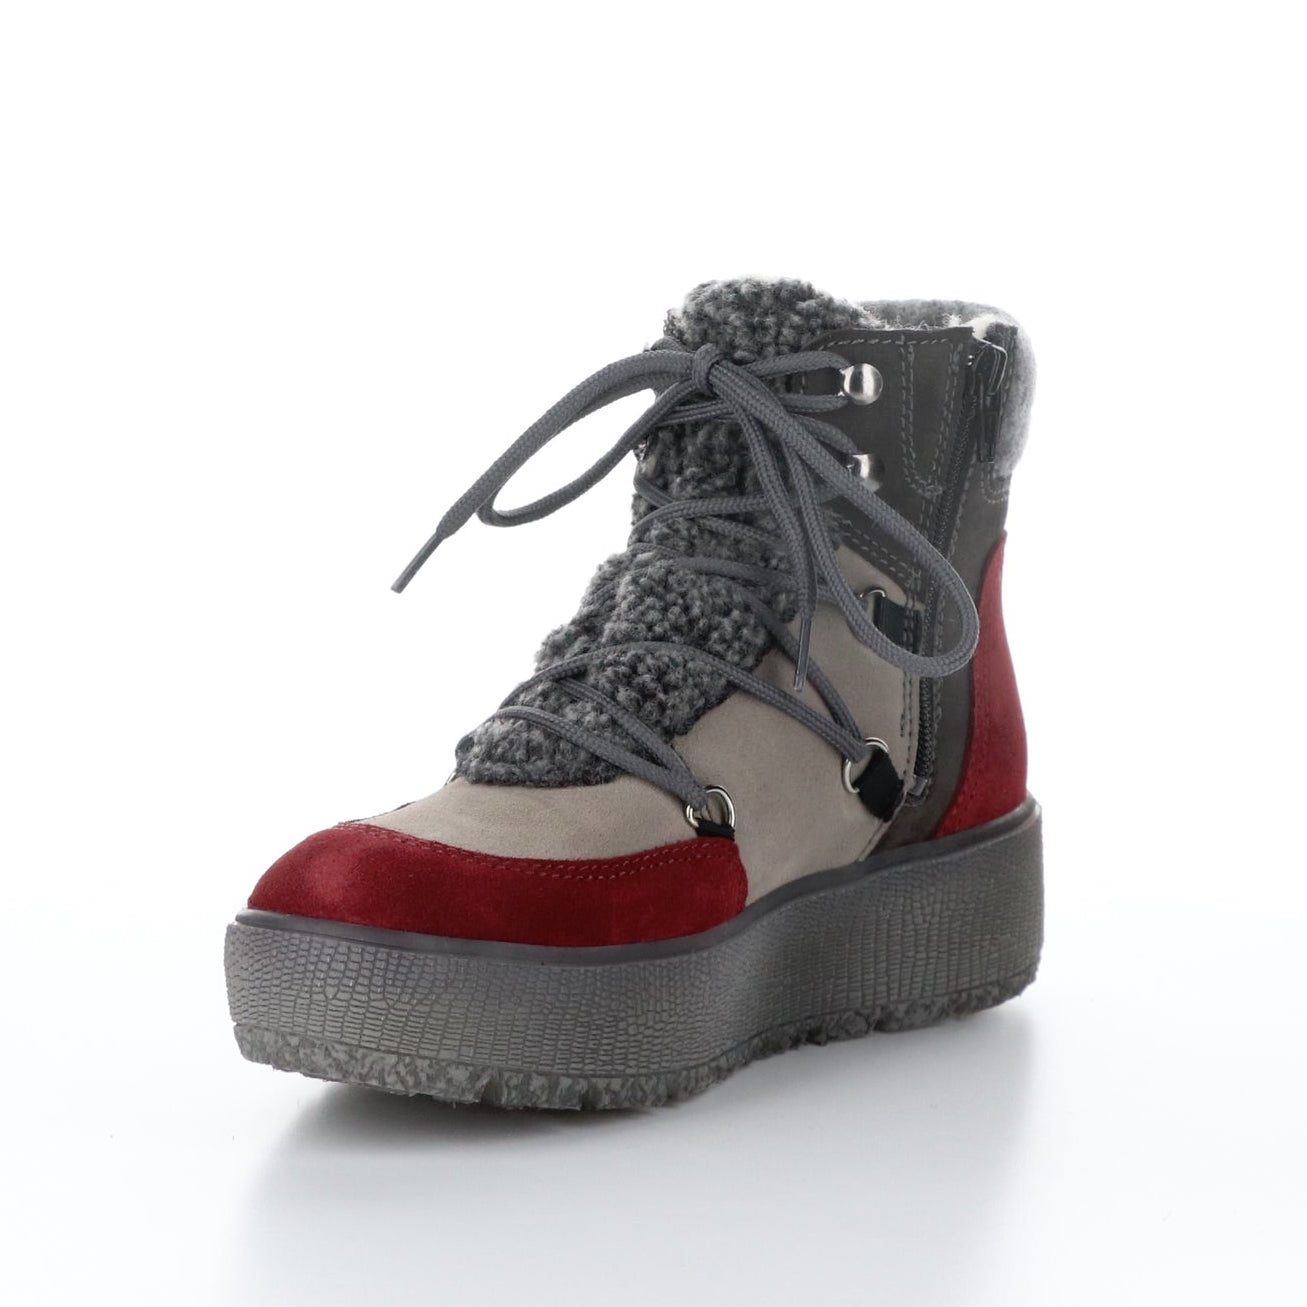 inner front side view of the bos & co ideal zip up bootie. This boot has grey, anthracite, and sangria colored suede panels and sherling upper. The boot also has a platform sole, a lace up front, and an inner side zipper..